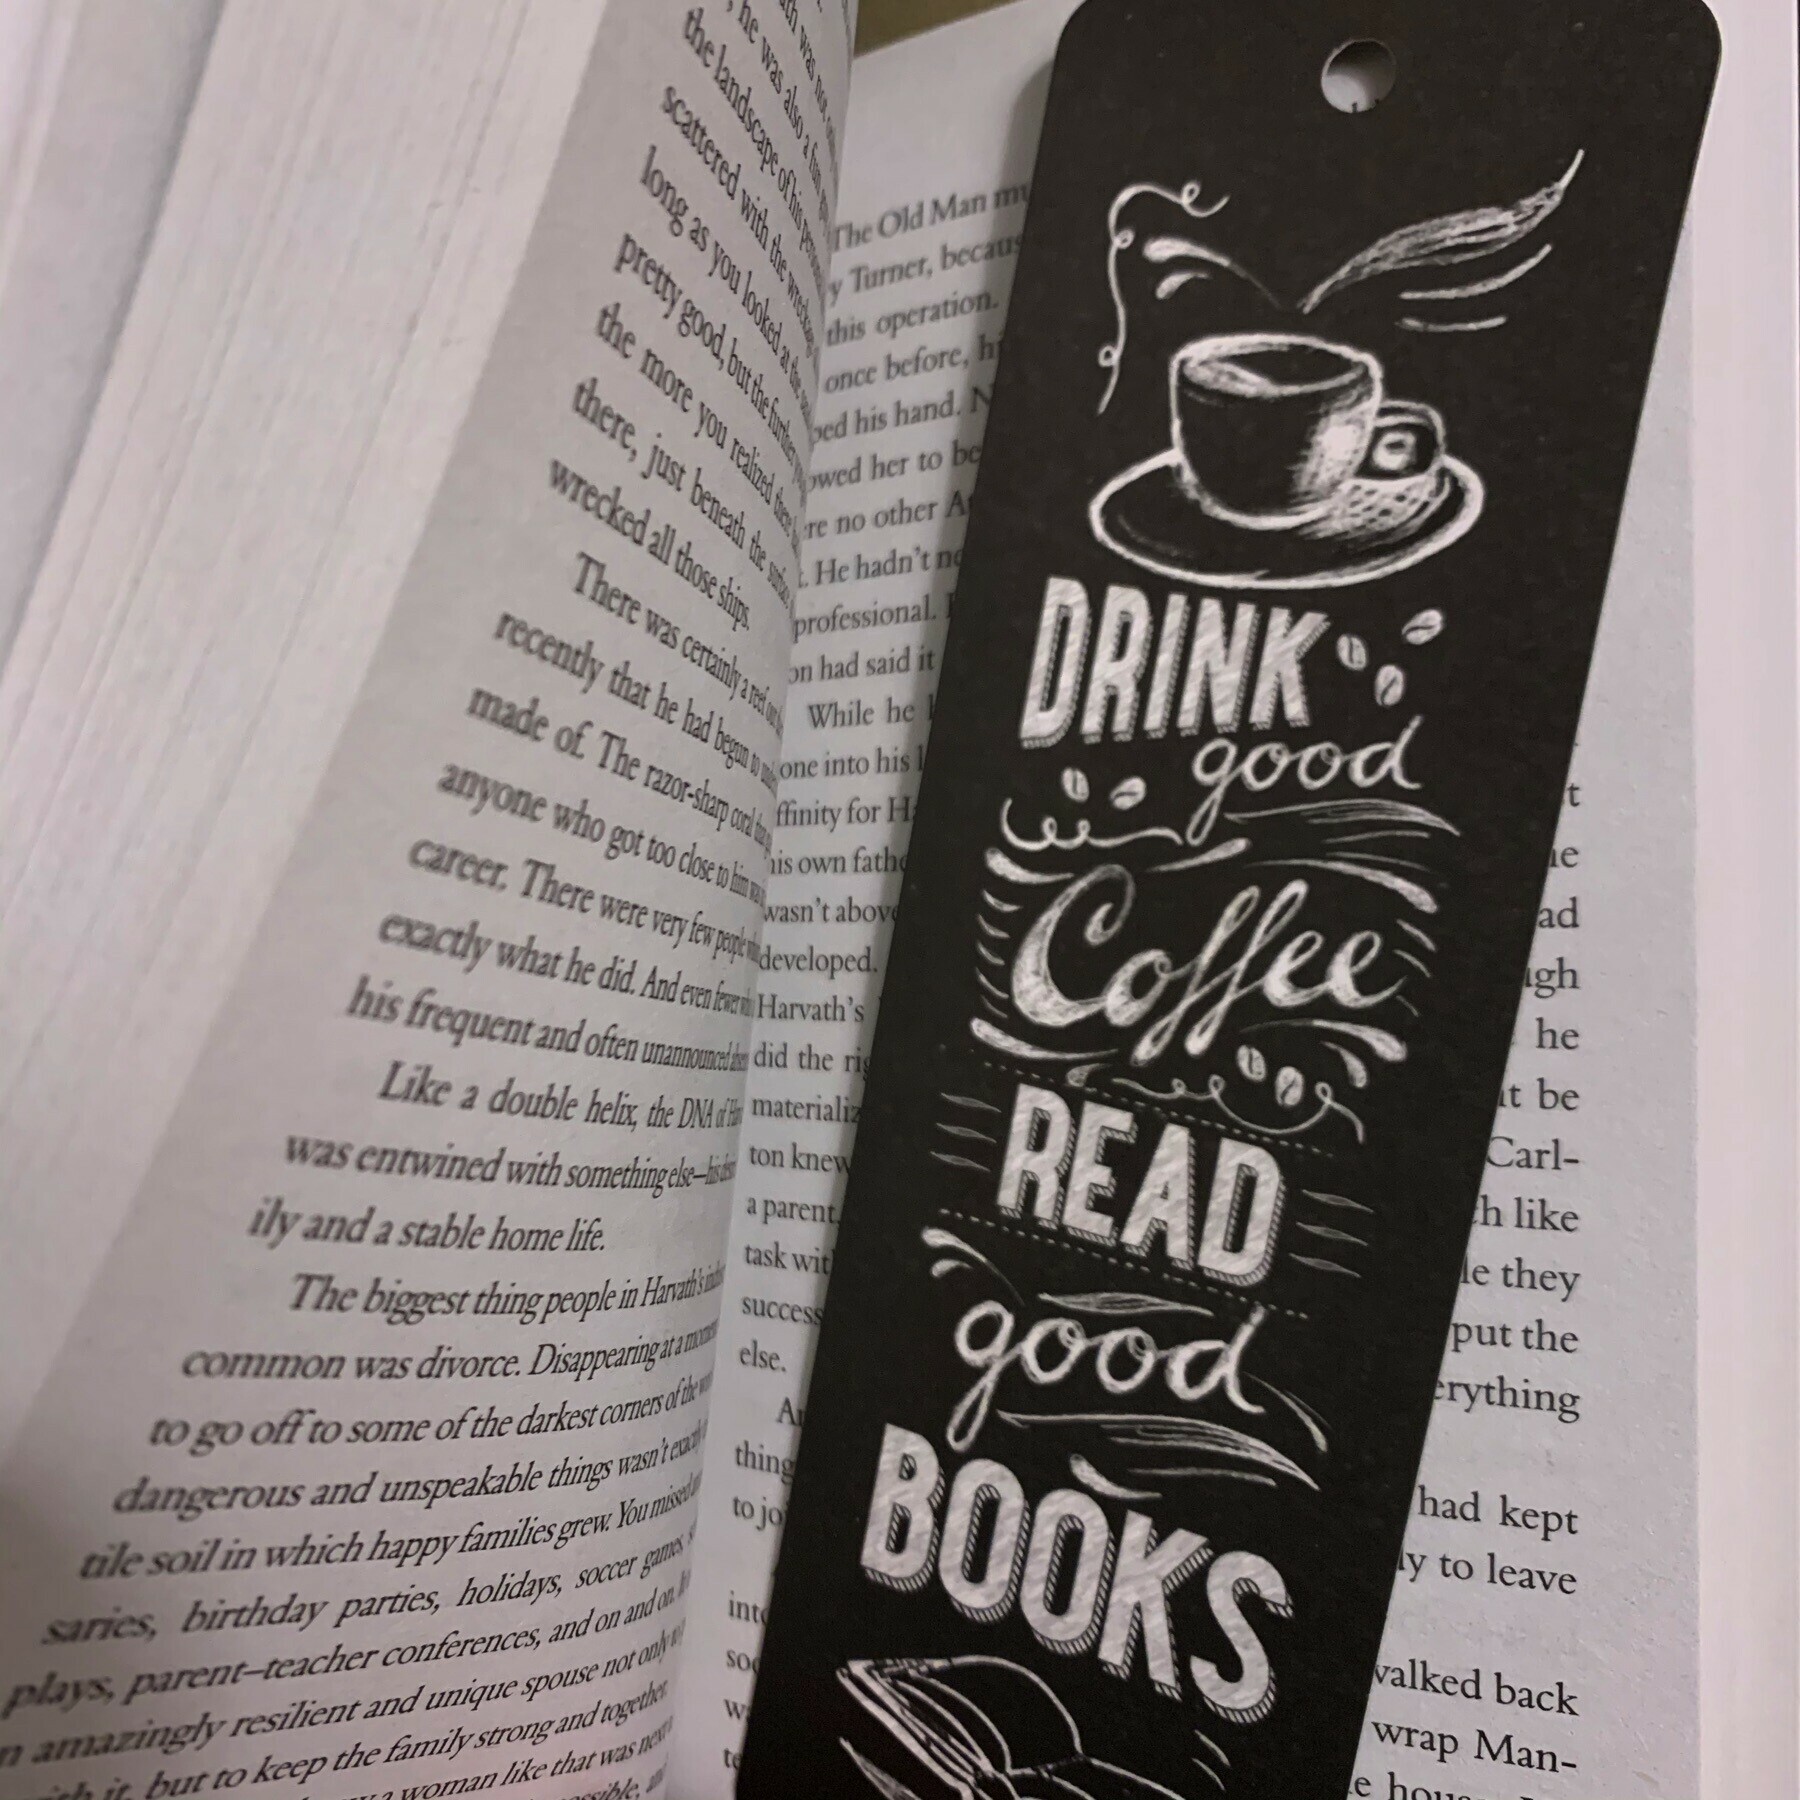 Bookmark: Drink good coffee and read good books